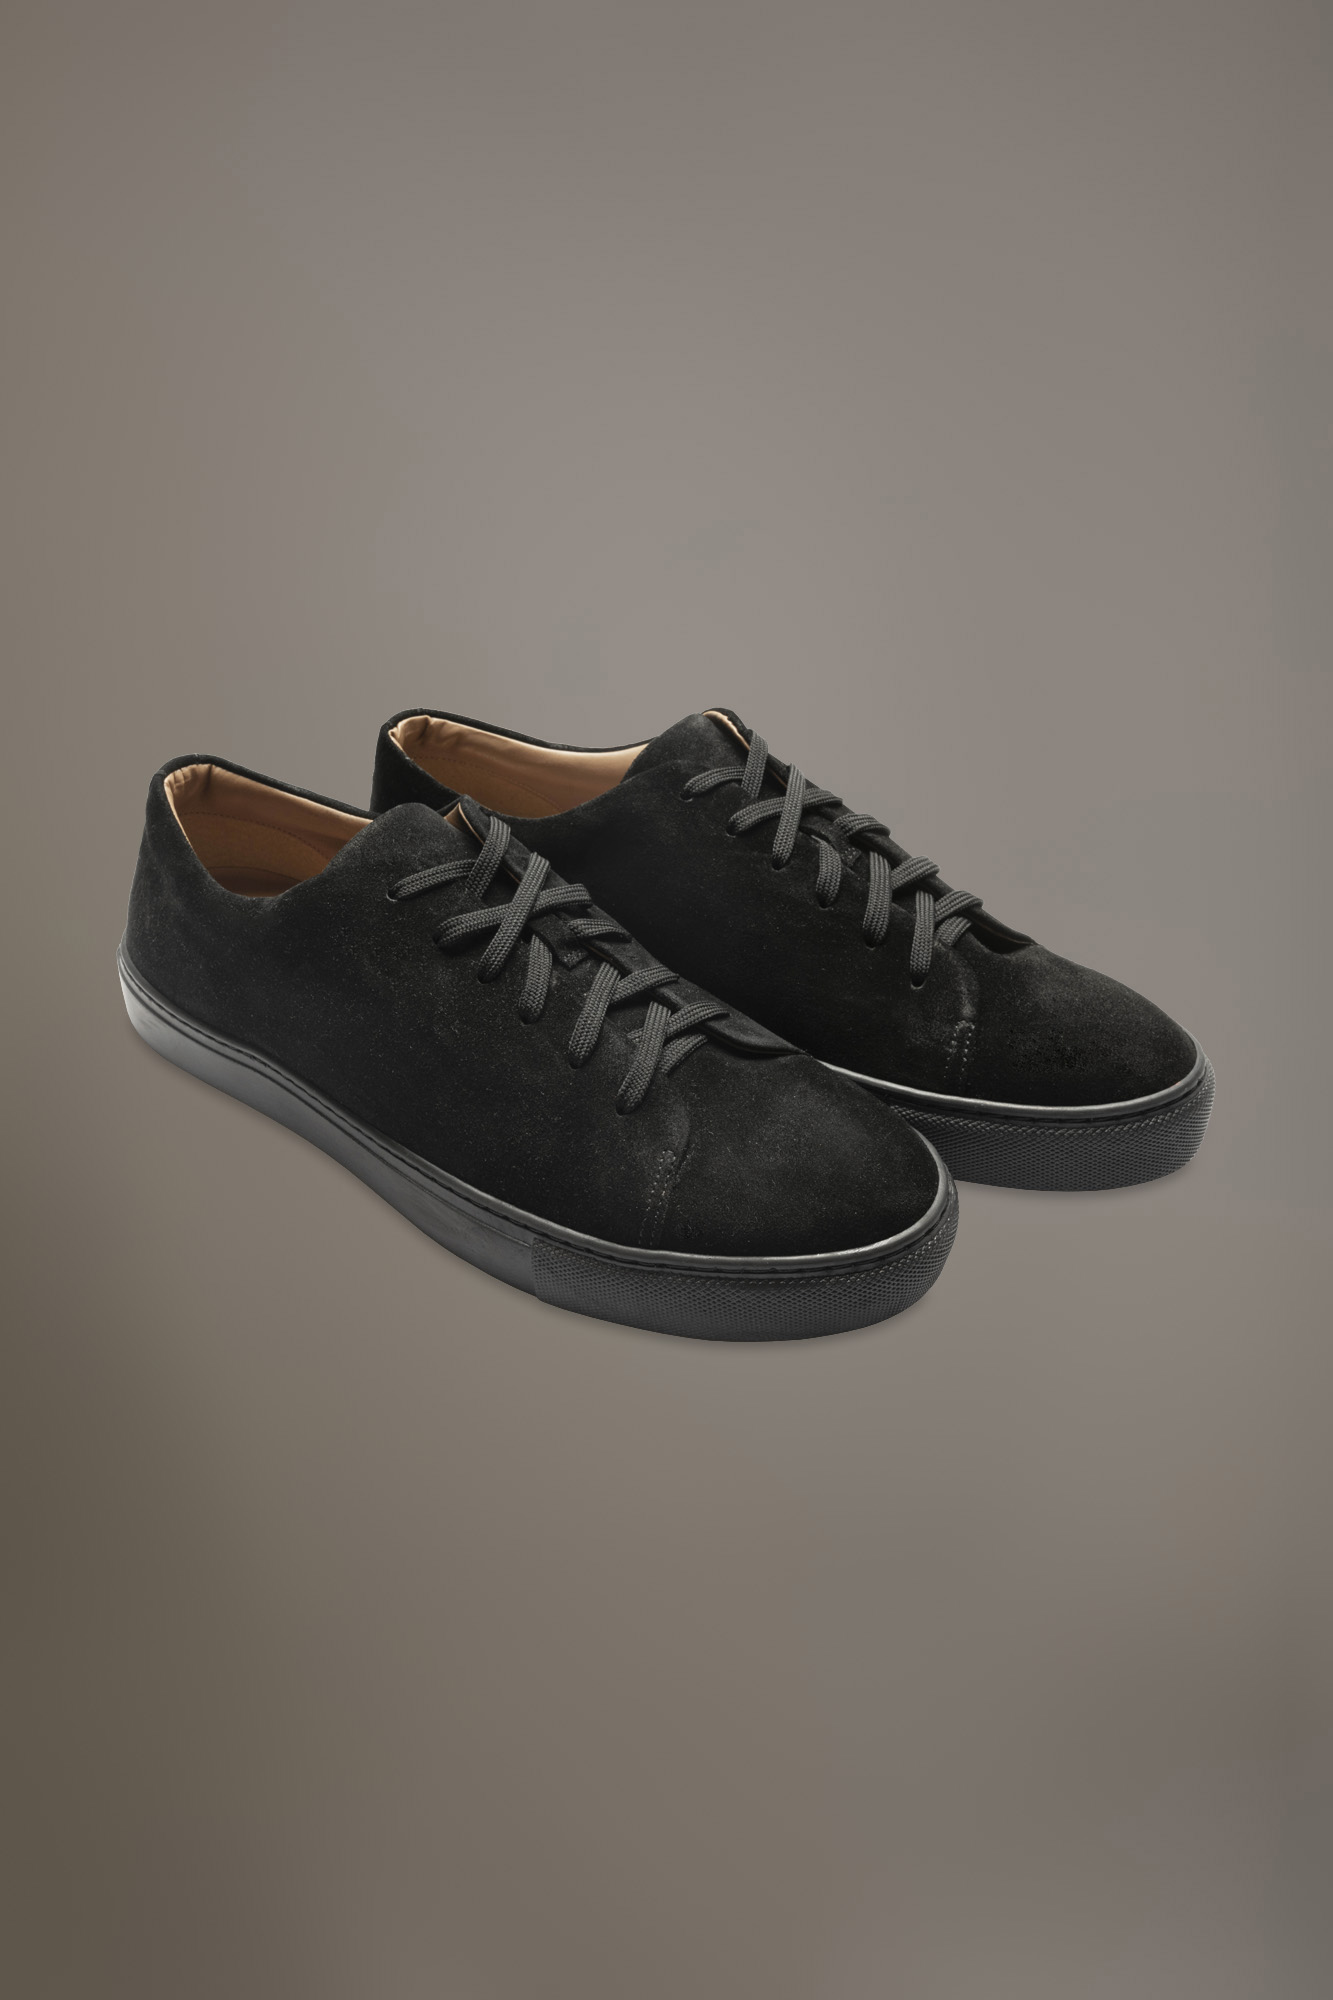 100% suede leather sneakers with rubber sole